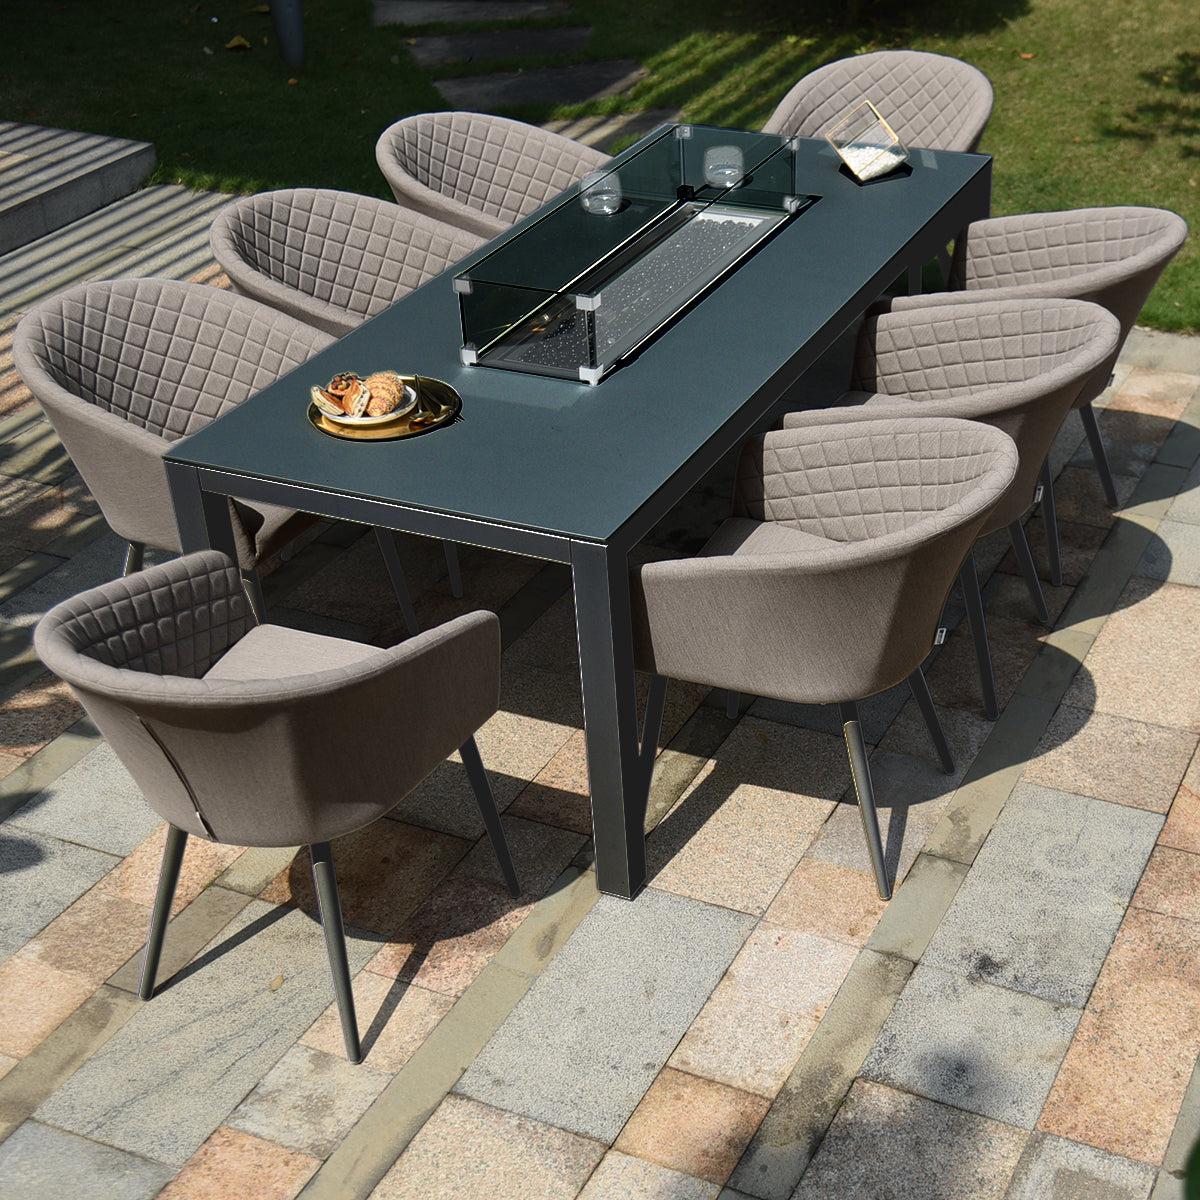 Maze - Outdoor Fabric Ambition 8 Seat Rectangular Dining Set with Fire Pit Table - Taupe